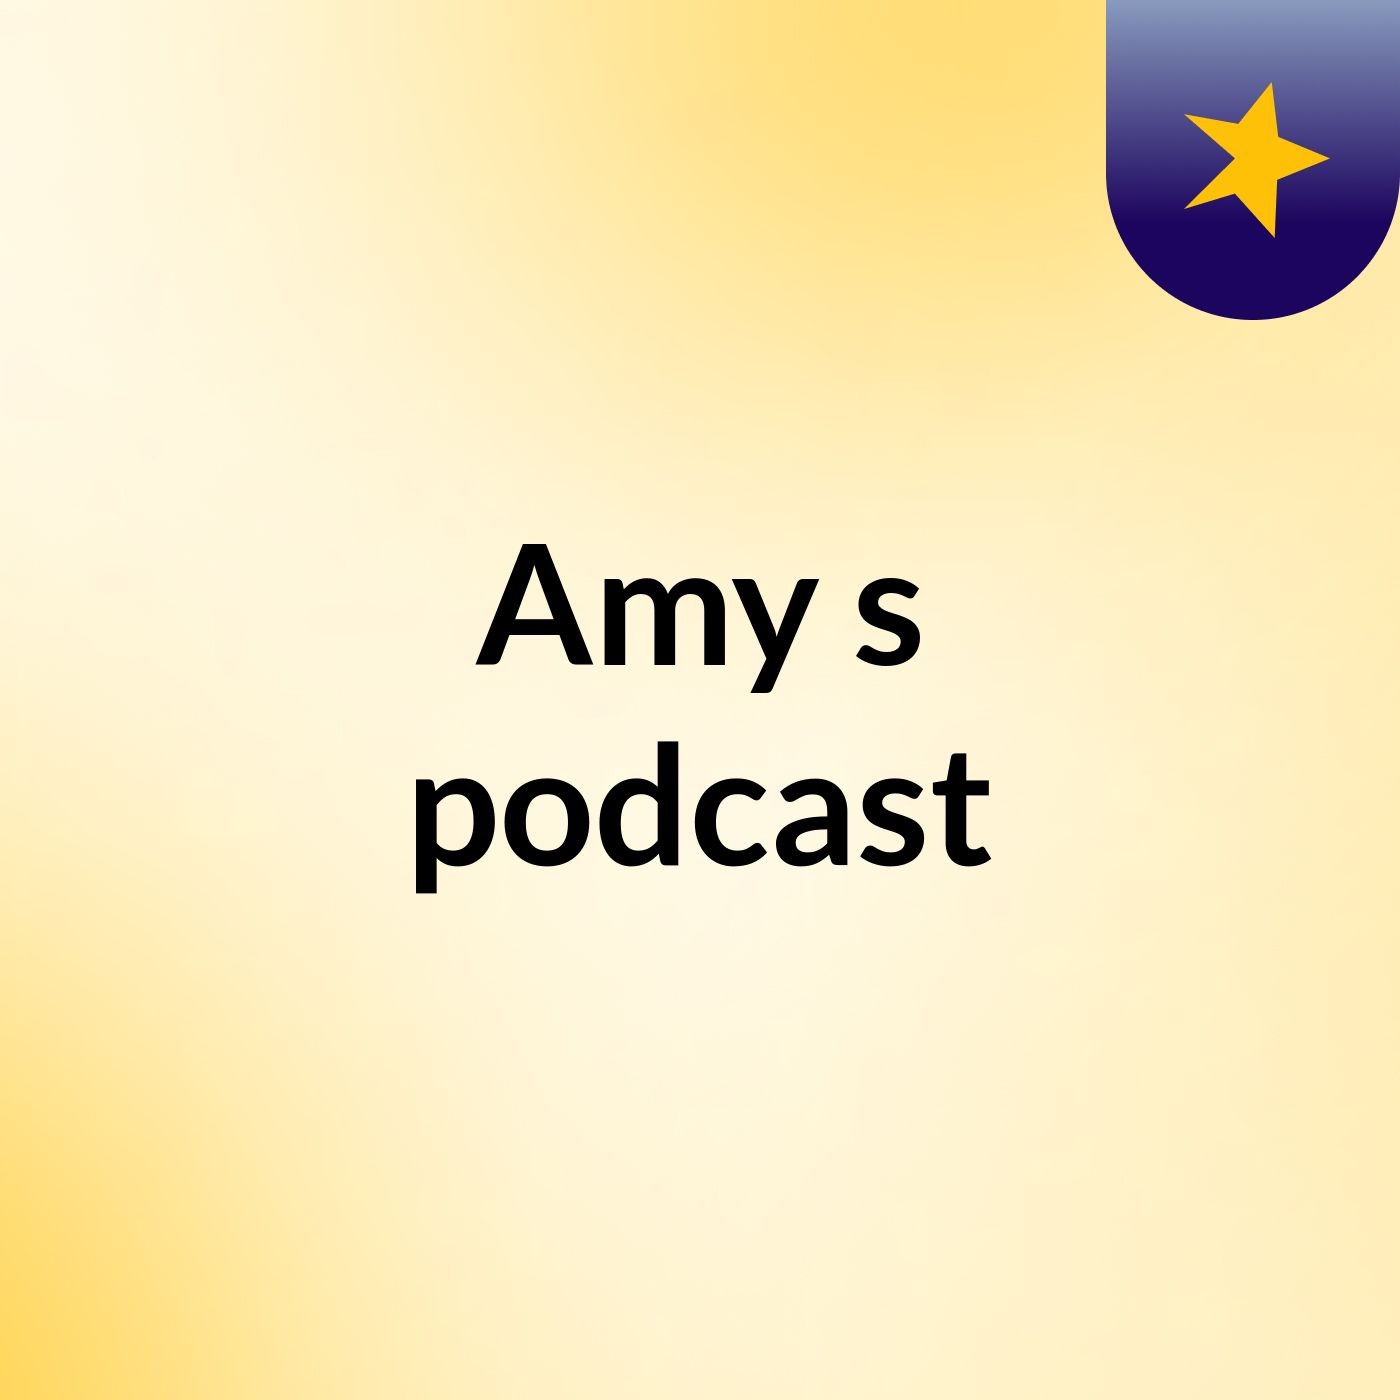 Amy's podcast